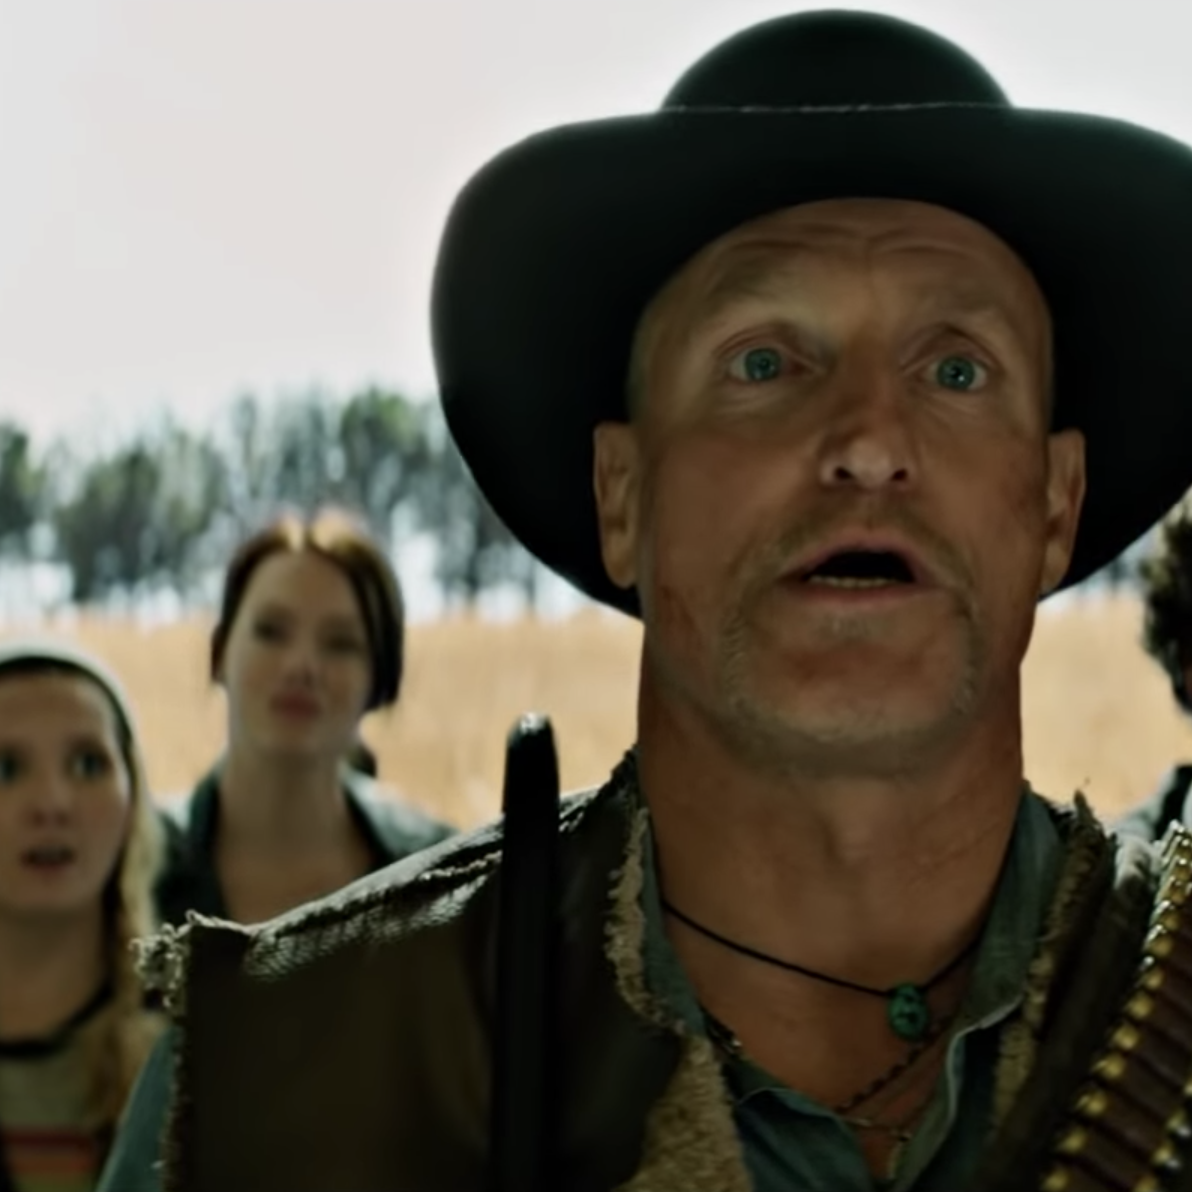 Zombieland 2' A Go At Sony With Originals Retuning – Deadline